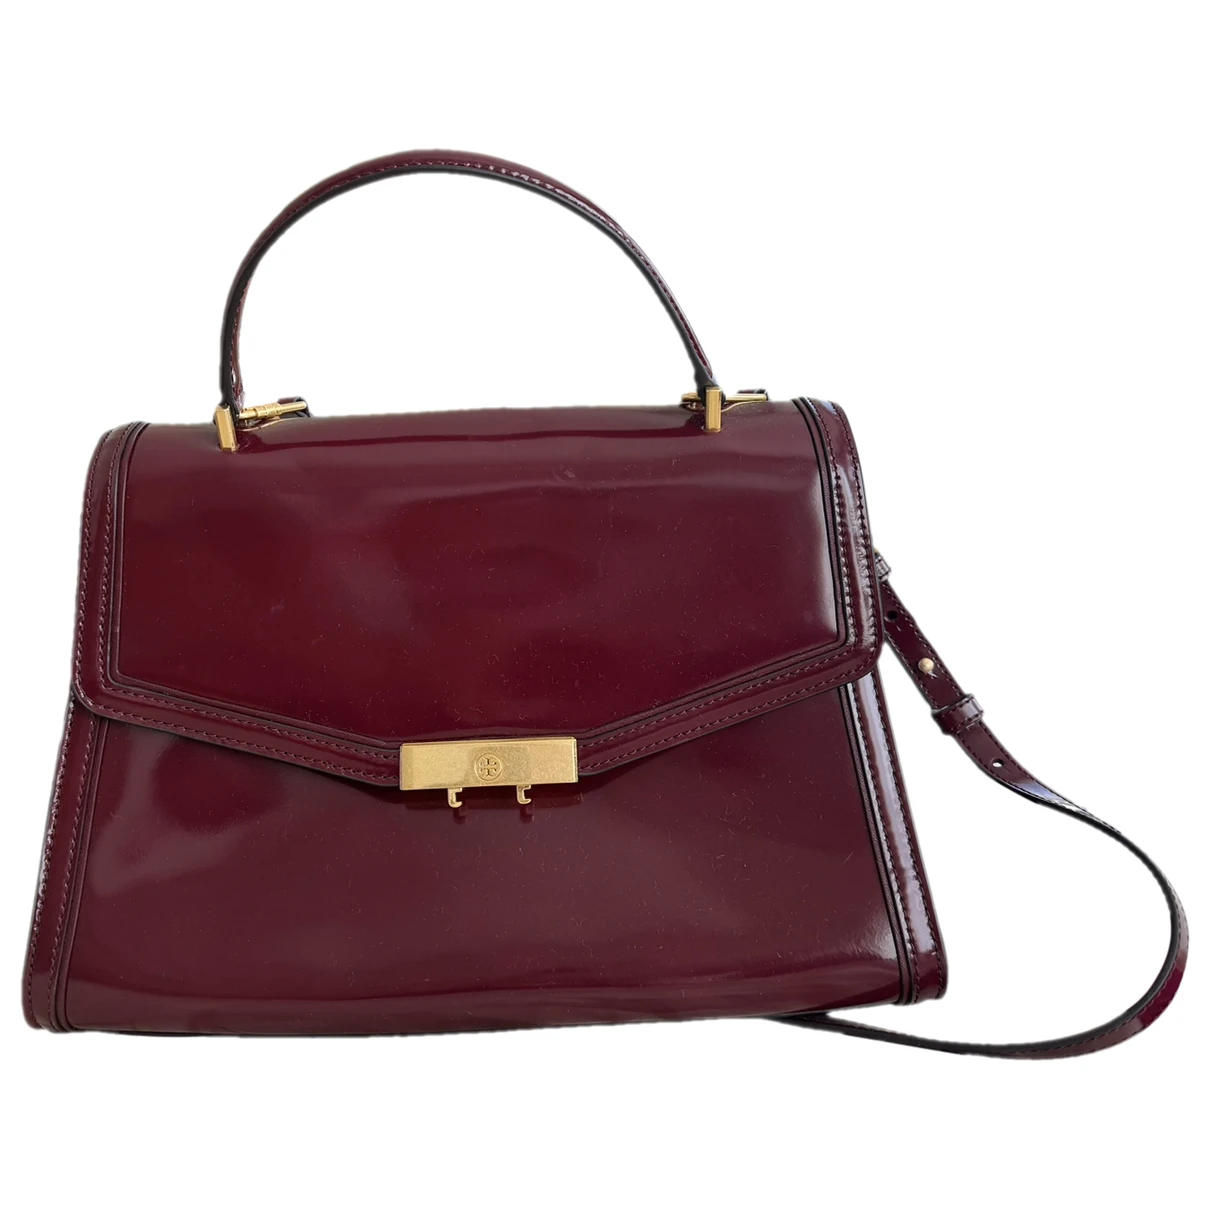 Pre-owned Tory Burch Leather Satchel In Burgundy